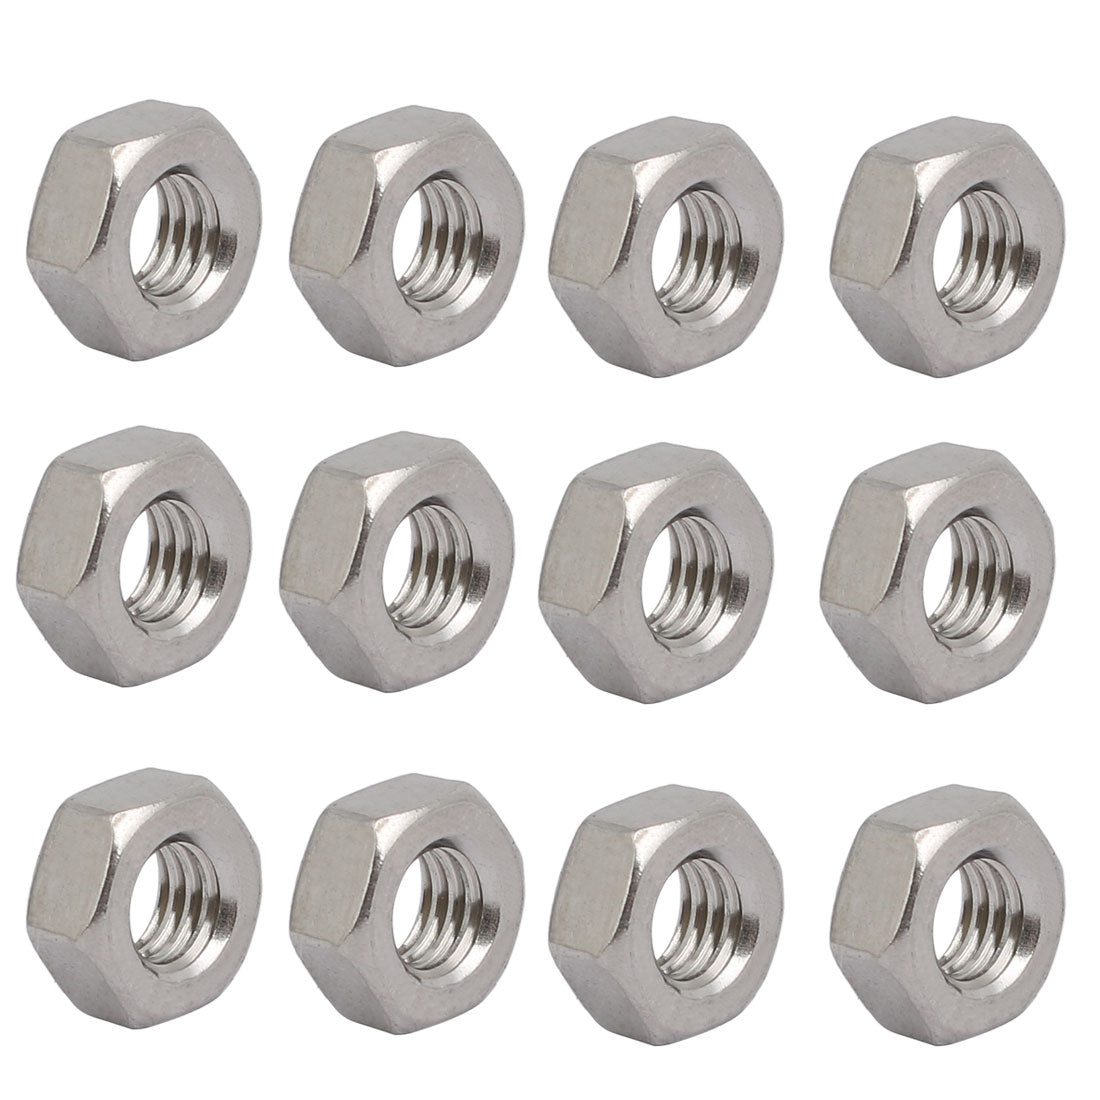 uxcell Uxcell 12pcs M6 x 1mm Pitch Metric Thread 304 Stainless Steel Left Hand Hex Nuts